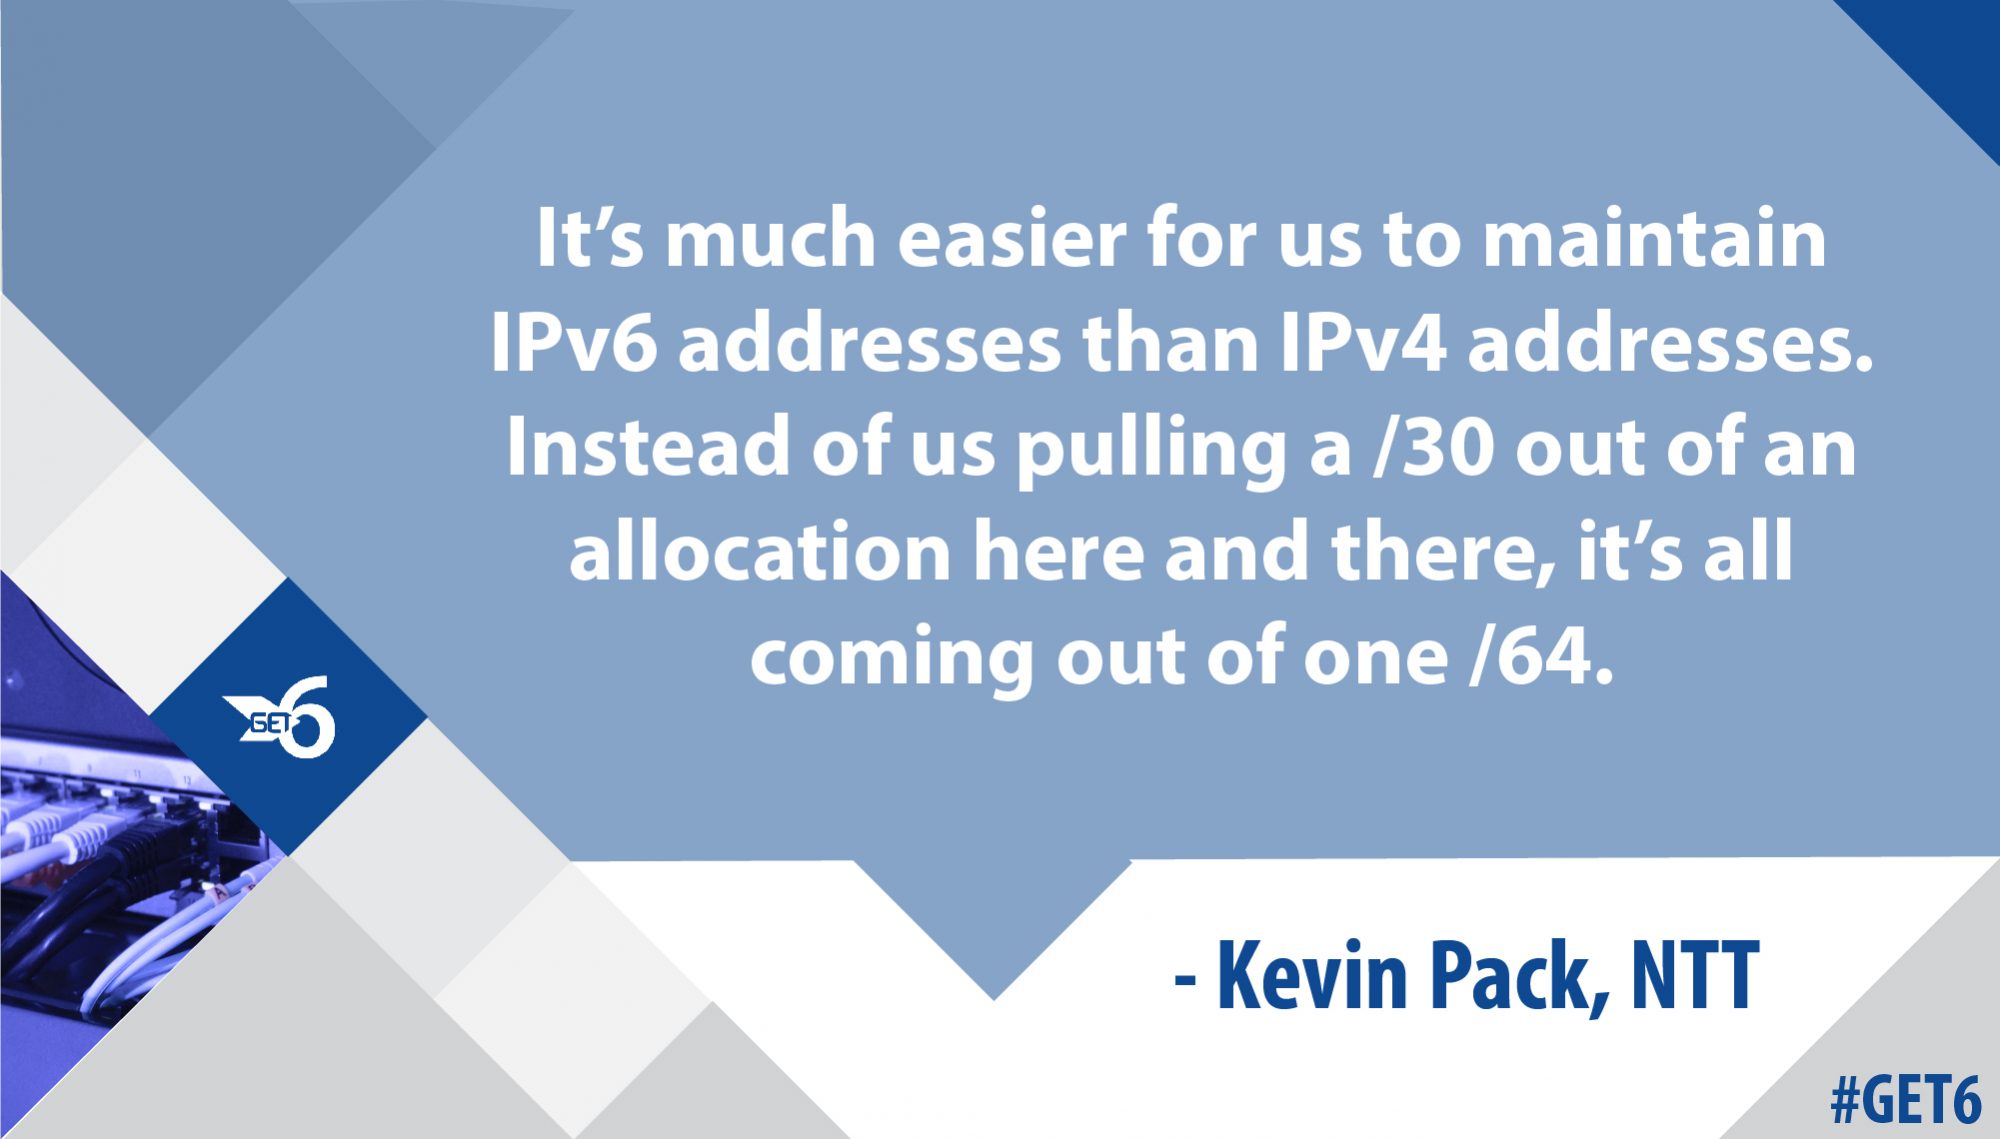 “It’s much easier for us to maintain IPv6 addresses than IPv4 addresses. Instead of us pulling a /30 out of an allocation here and there, it’s all coming out of one /64.